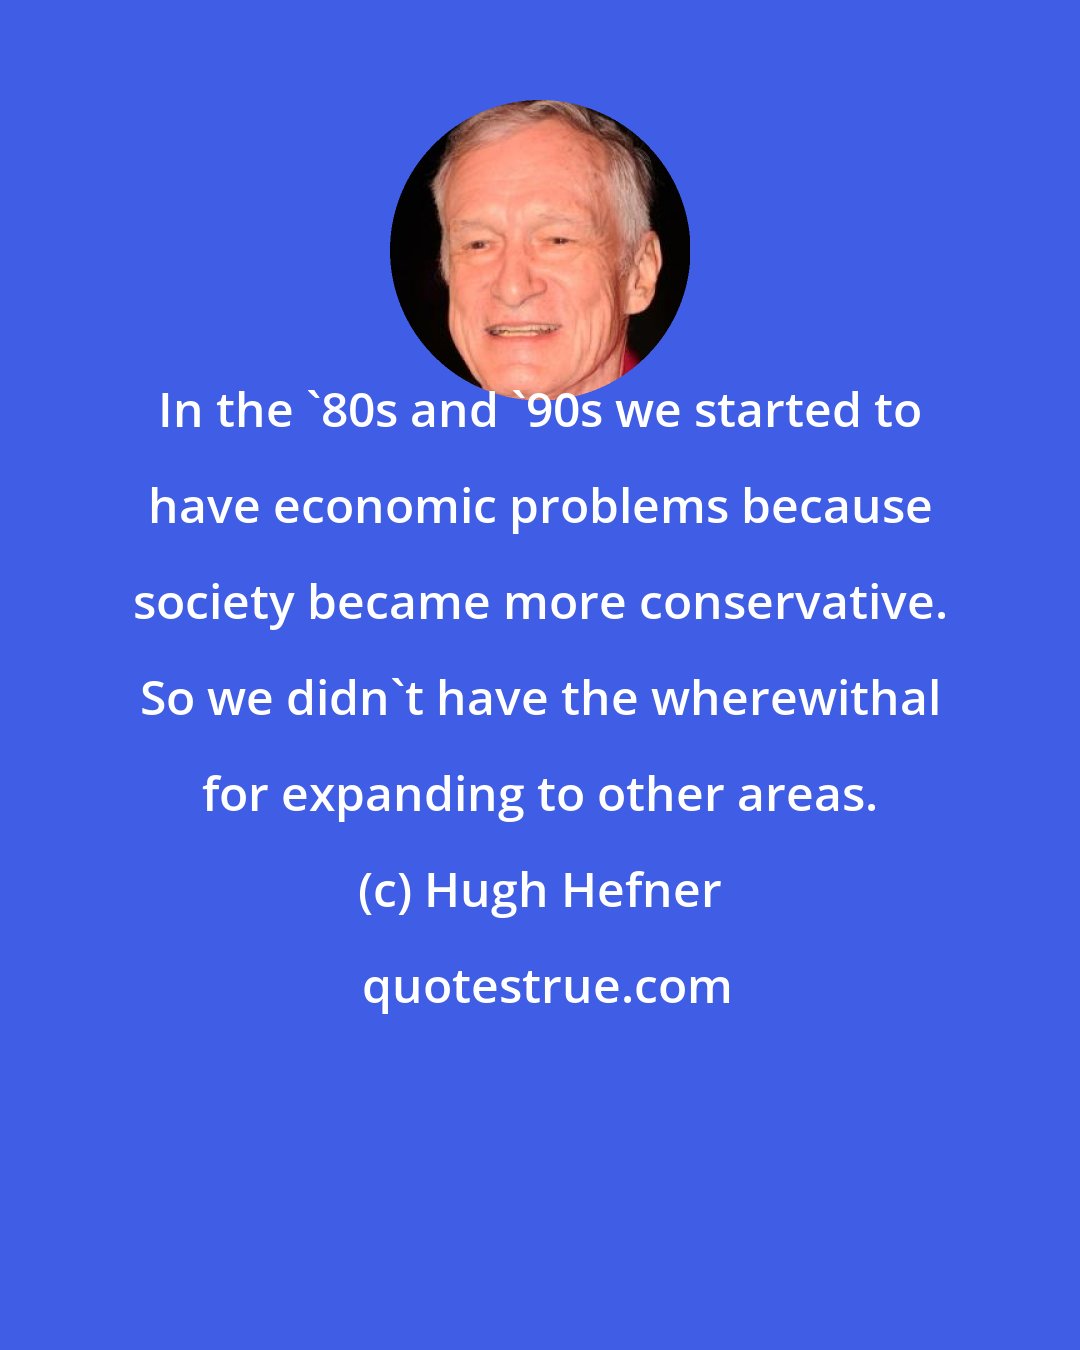 Hugh Hefner: In the '80s and '90s we started to have economic problems because society became more conservative. So we didn't have the wherewithal for expanding to other areas.